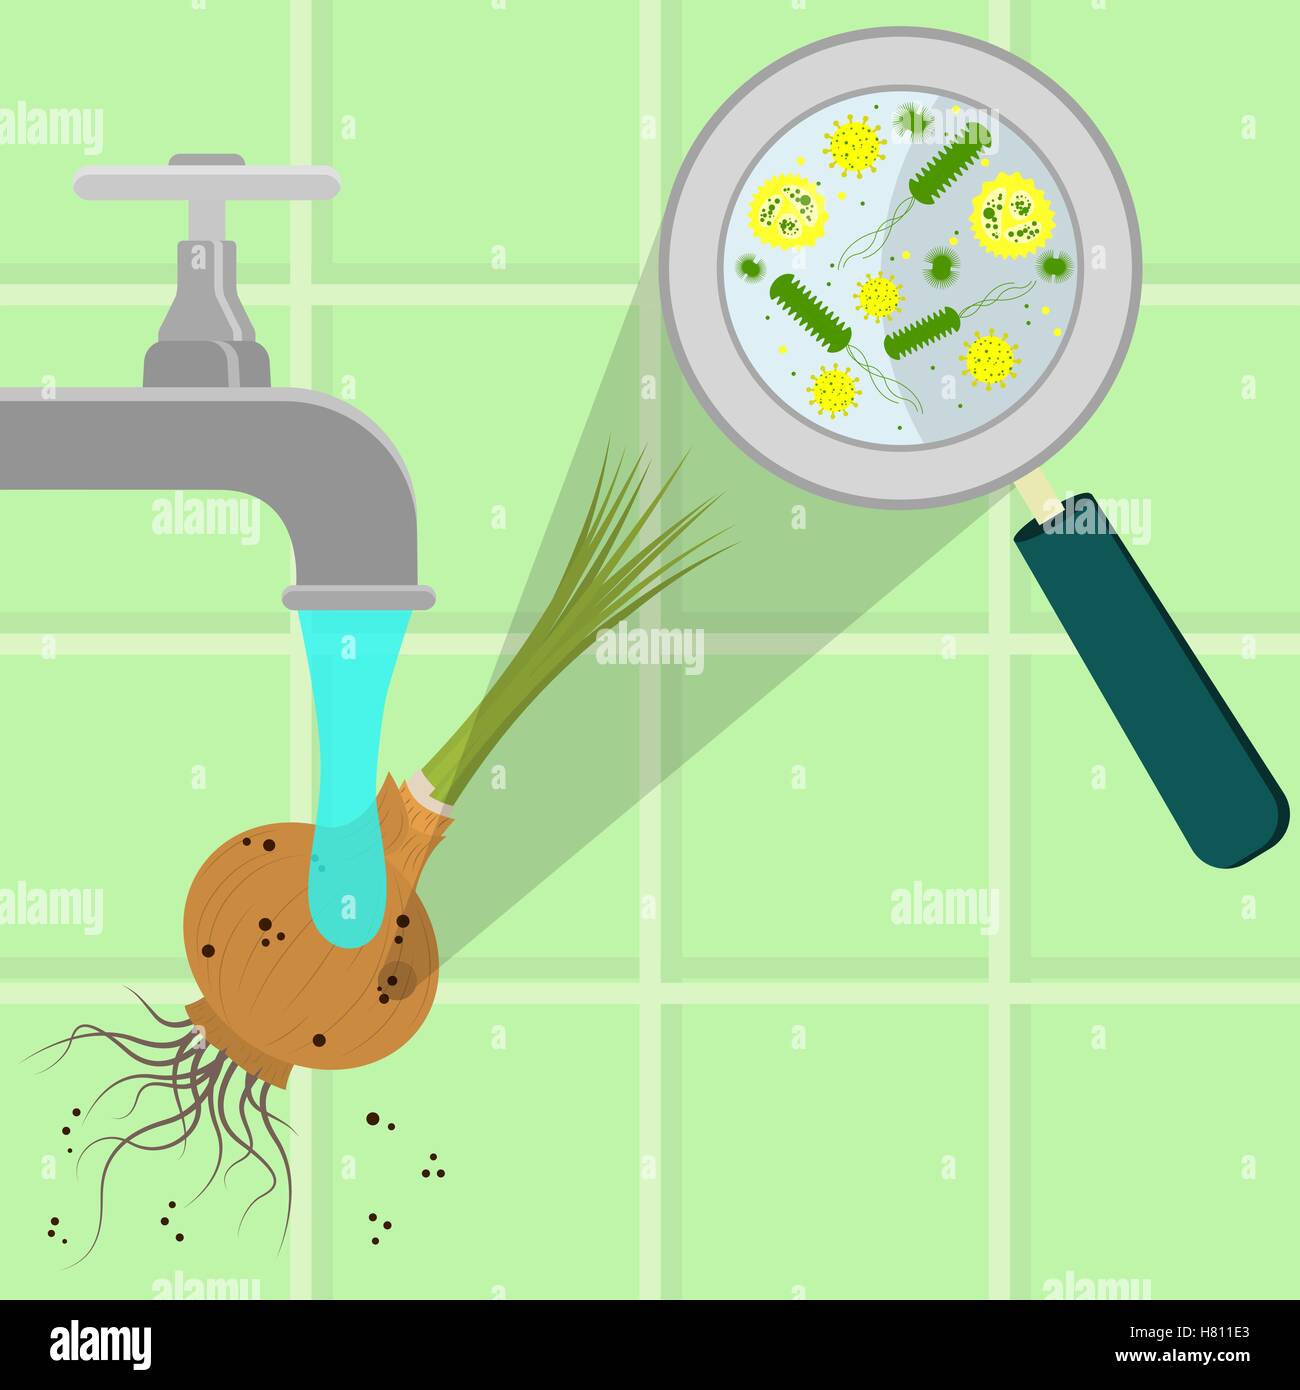 Contaminated onion being cleaned and washed in a kitchen. Microorganisms, virus and bacteria in the vegetable enlarged by a magn Stock Vector